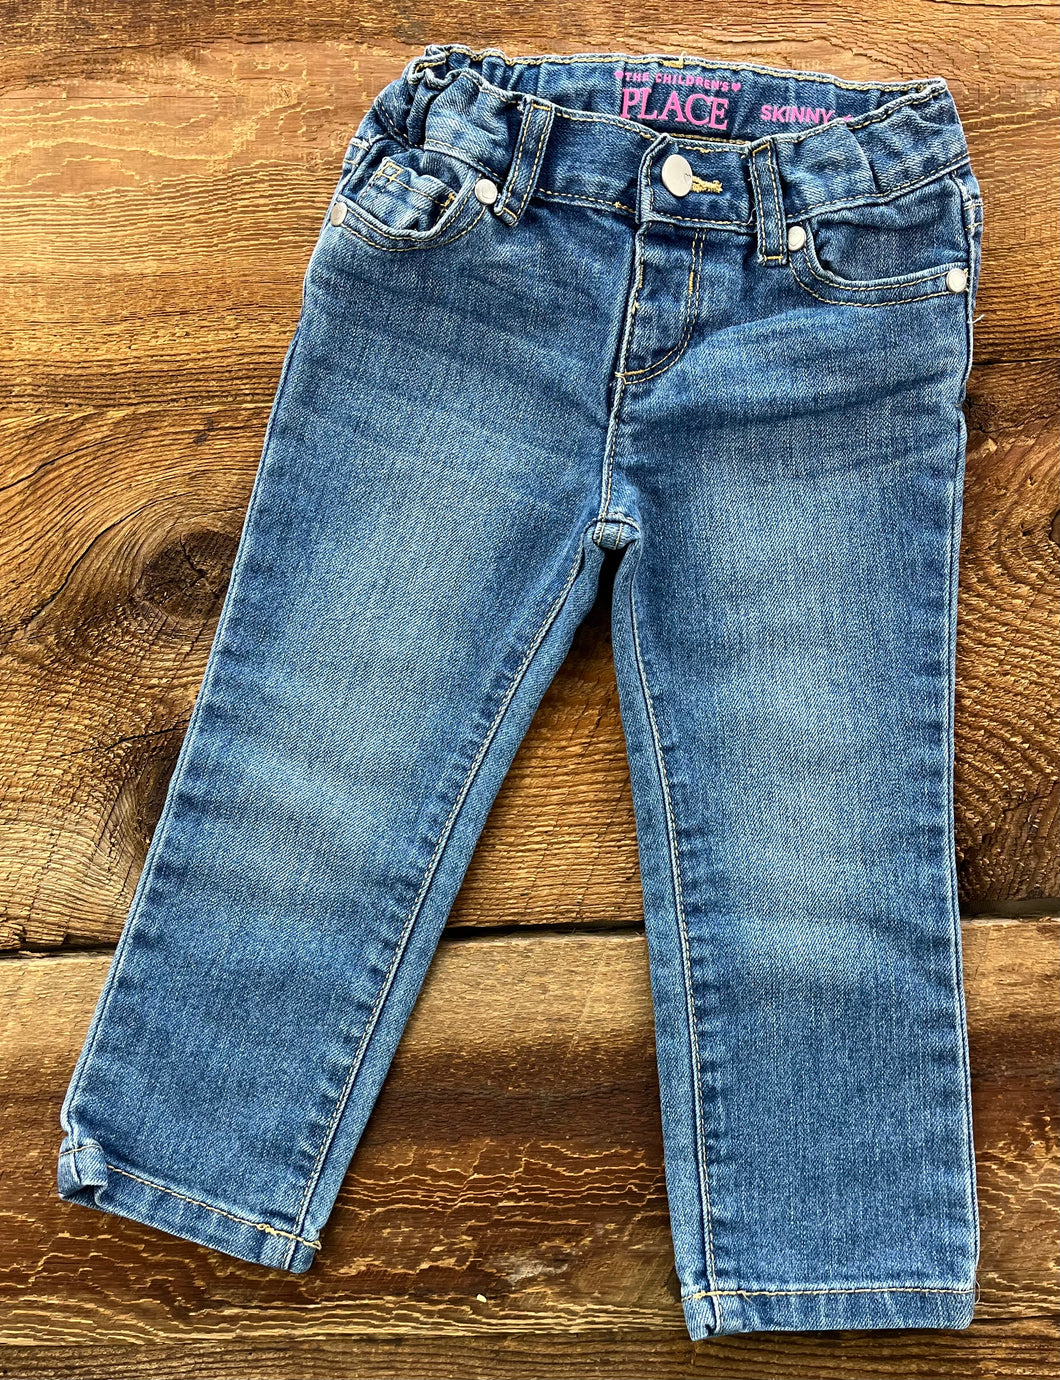 The Children’s Place 2T Skinny Jean